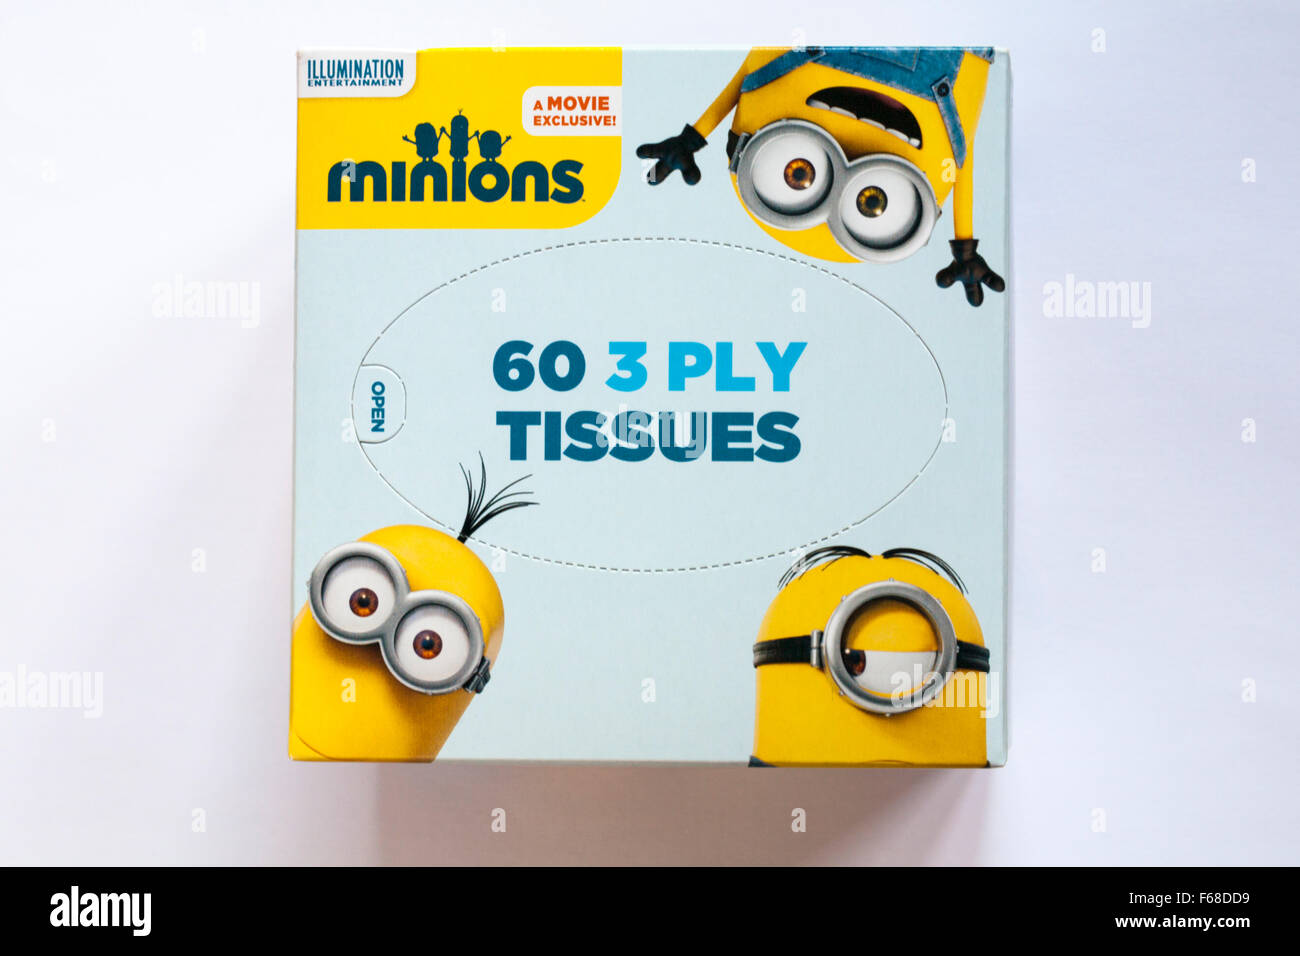 Box of Minions 60 3 ply tissues isolated on white background Stock Photo